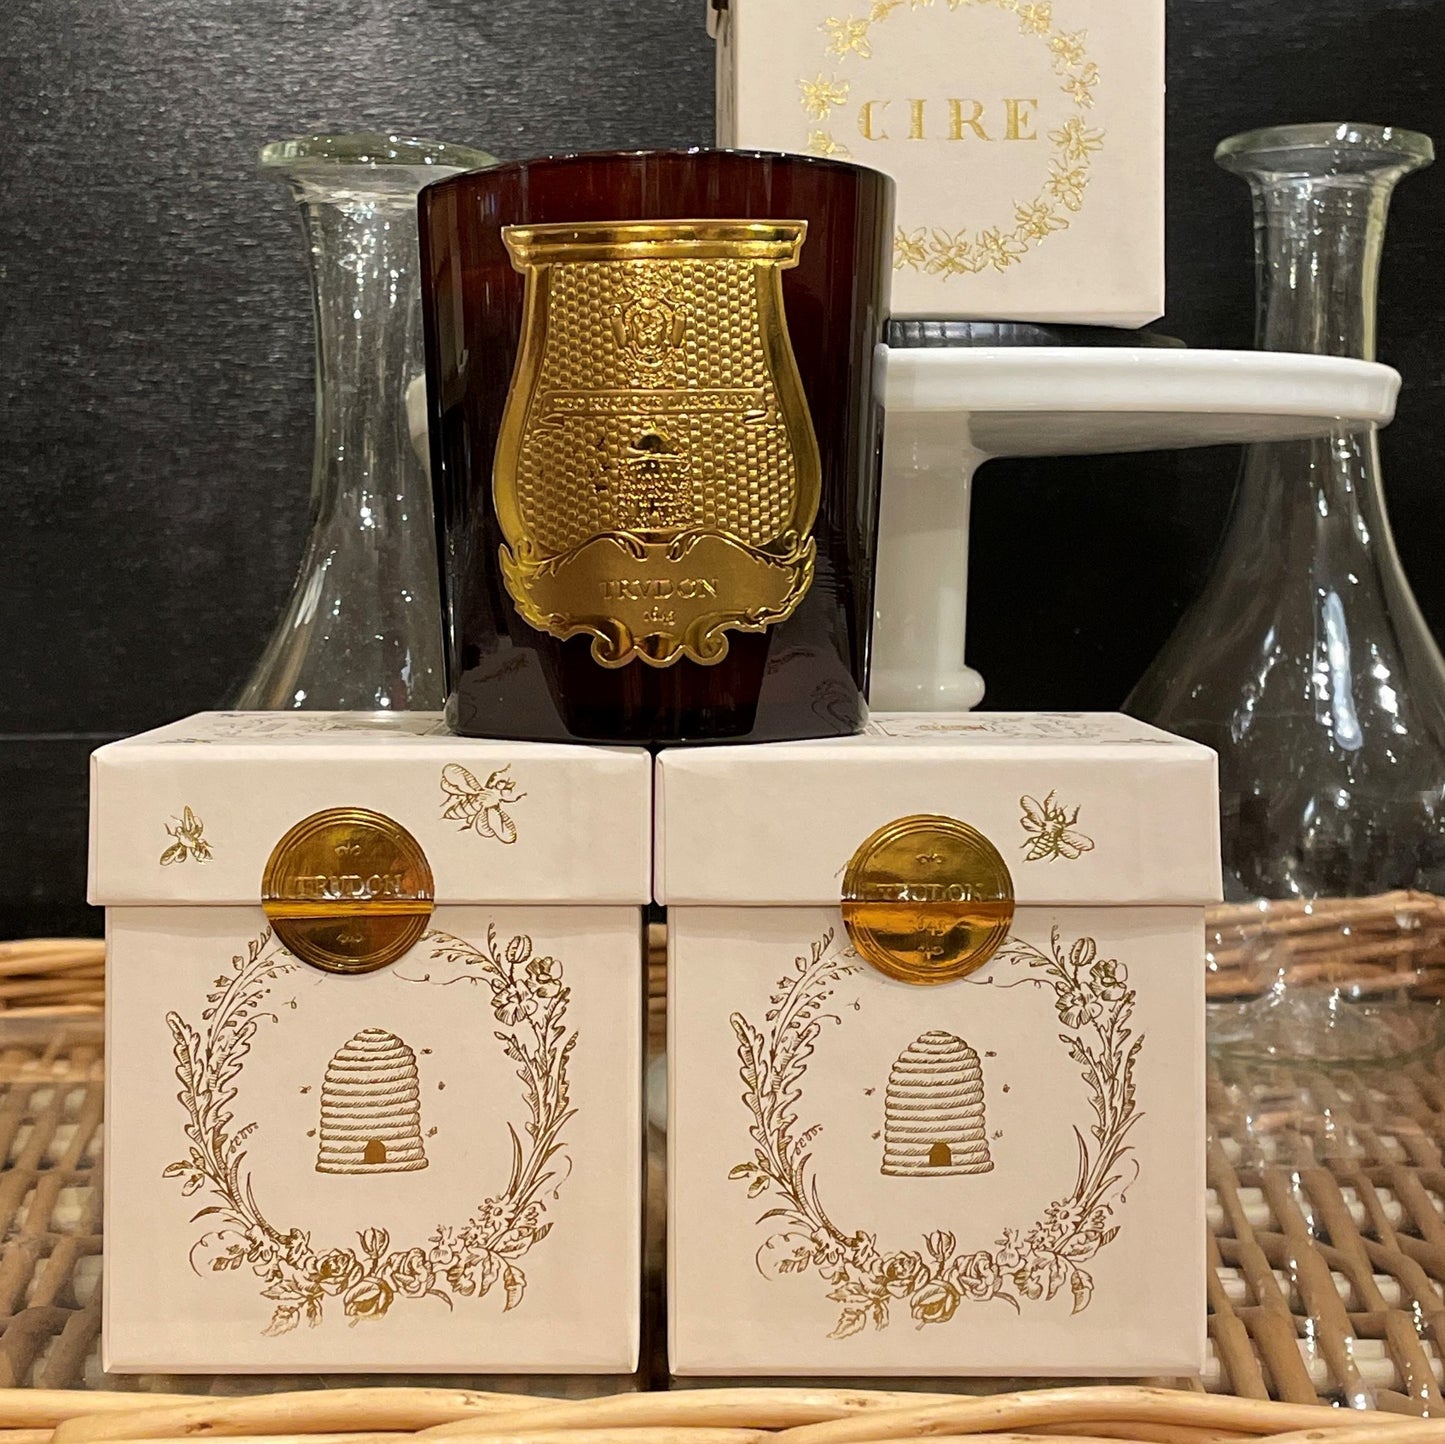 Cire Candle by Trudon